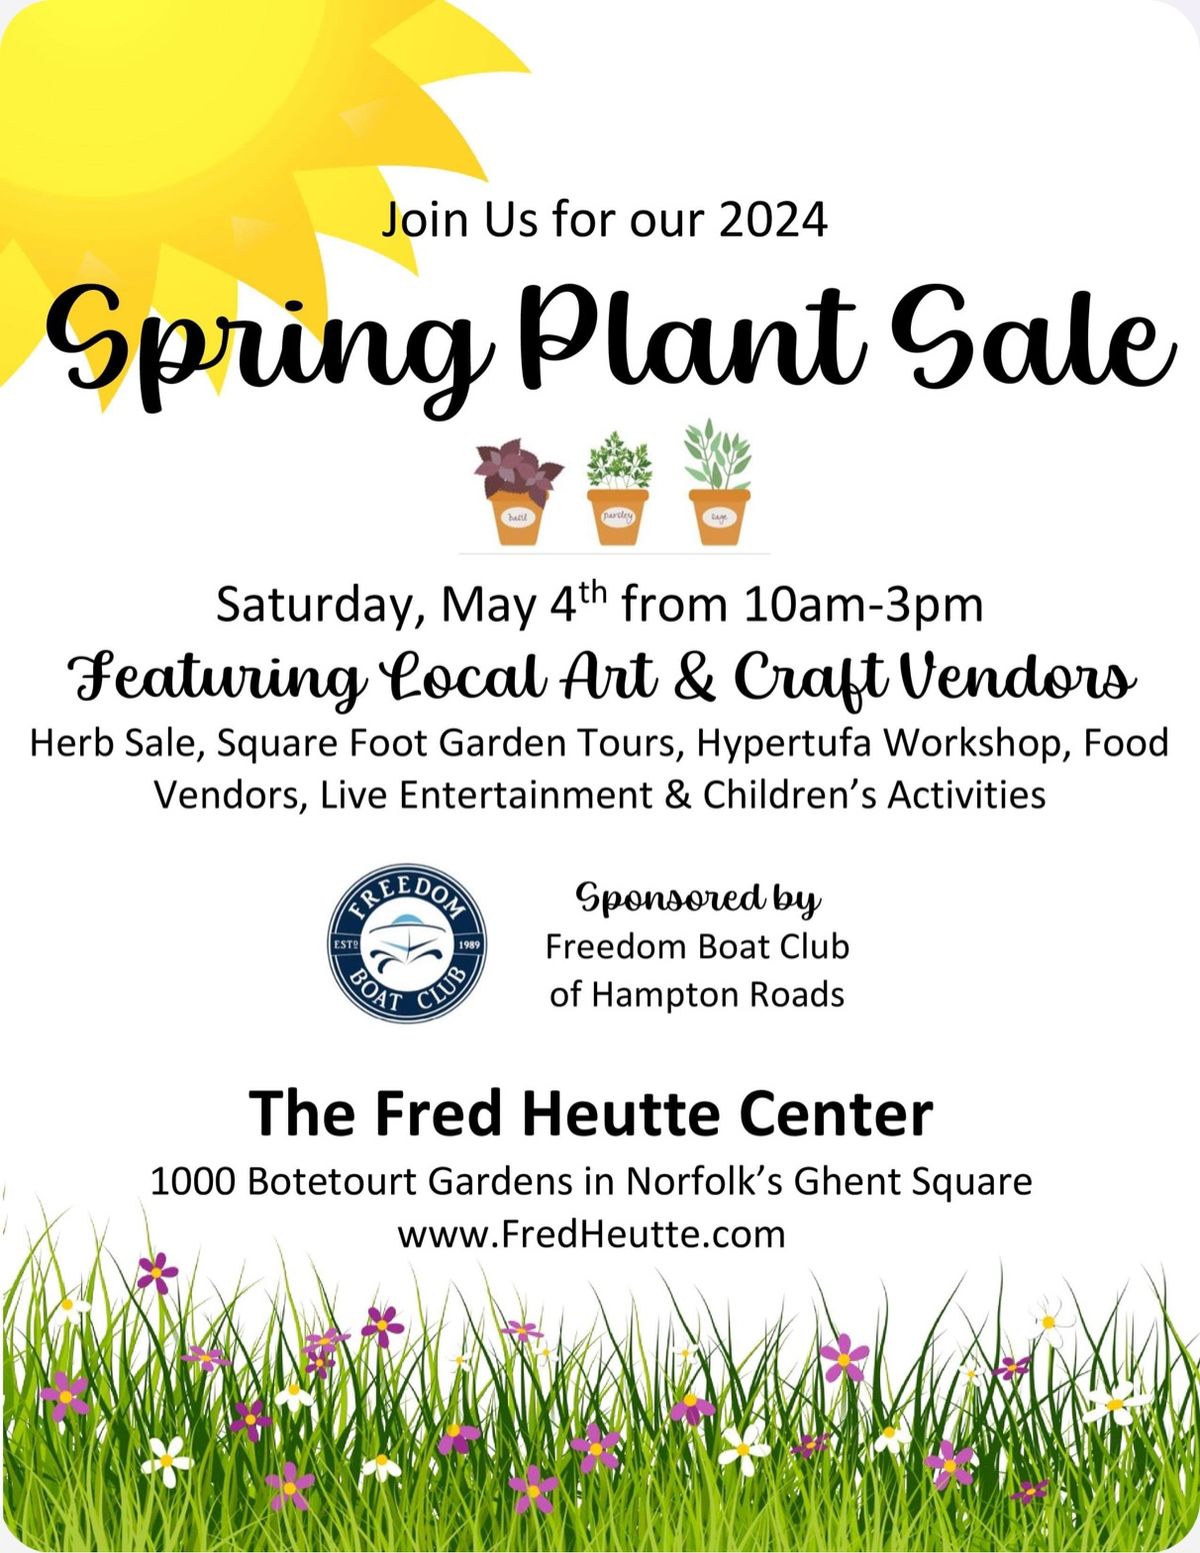 Spring Plant Sale feat. Local Art & Craft Vendors | Sponsored by Freedom Boat Club